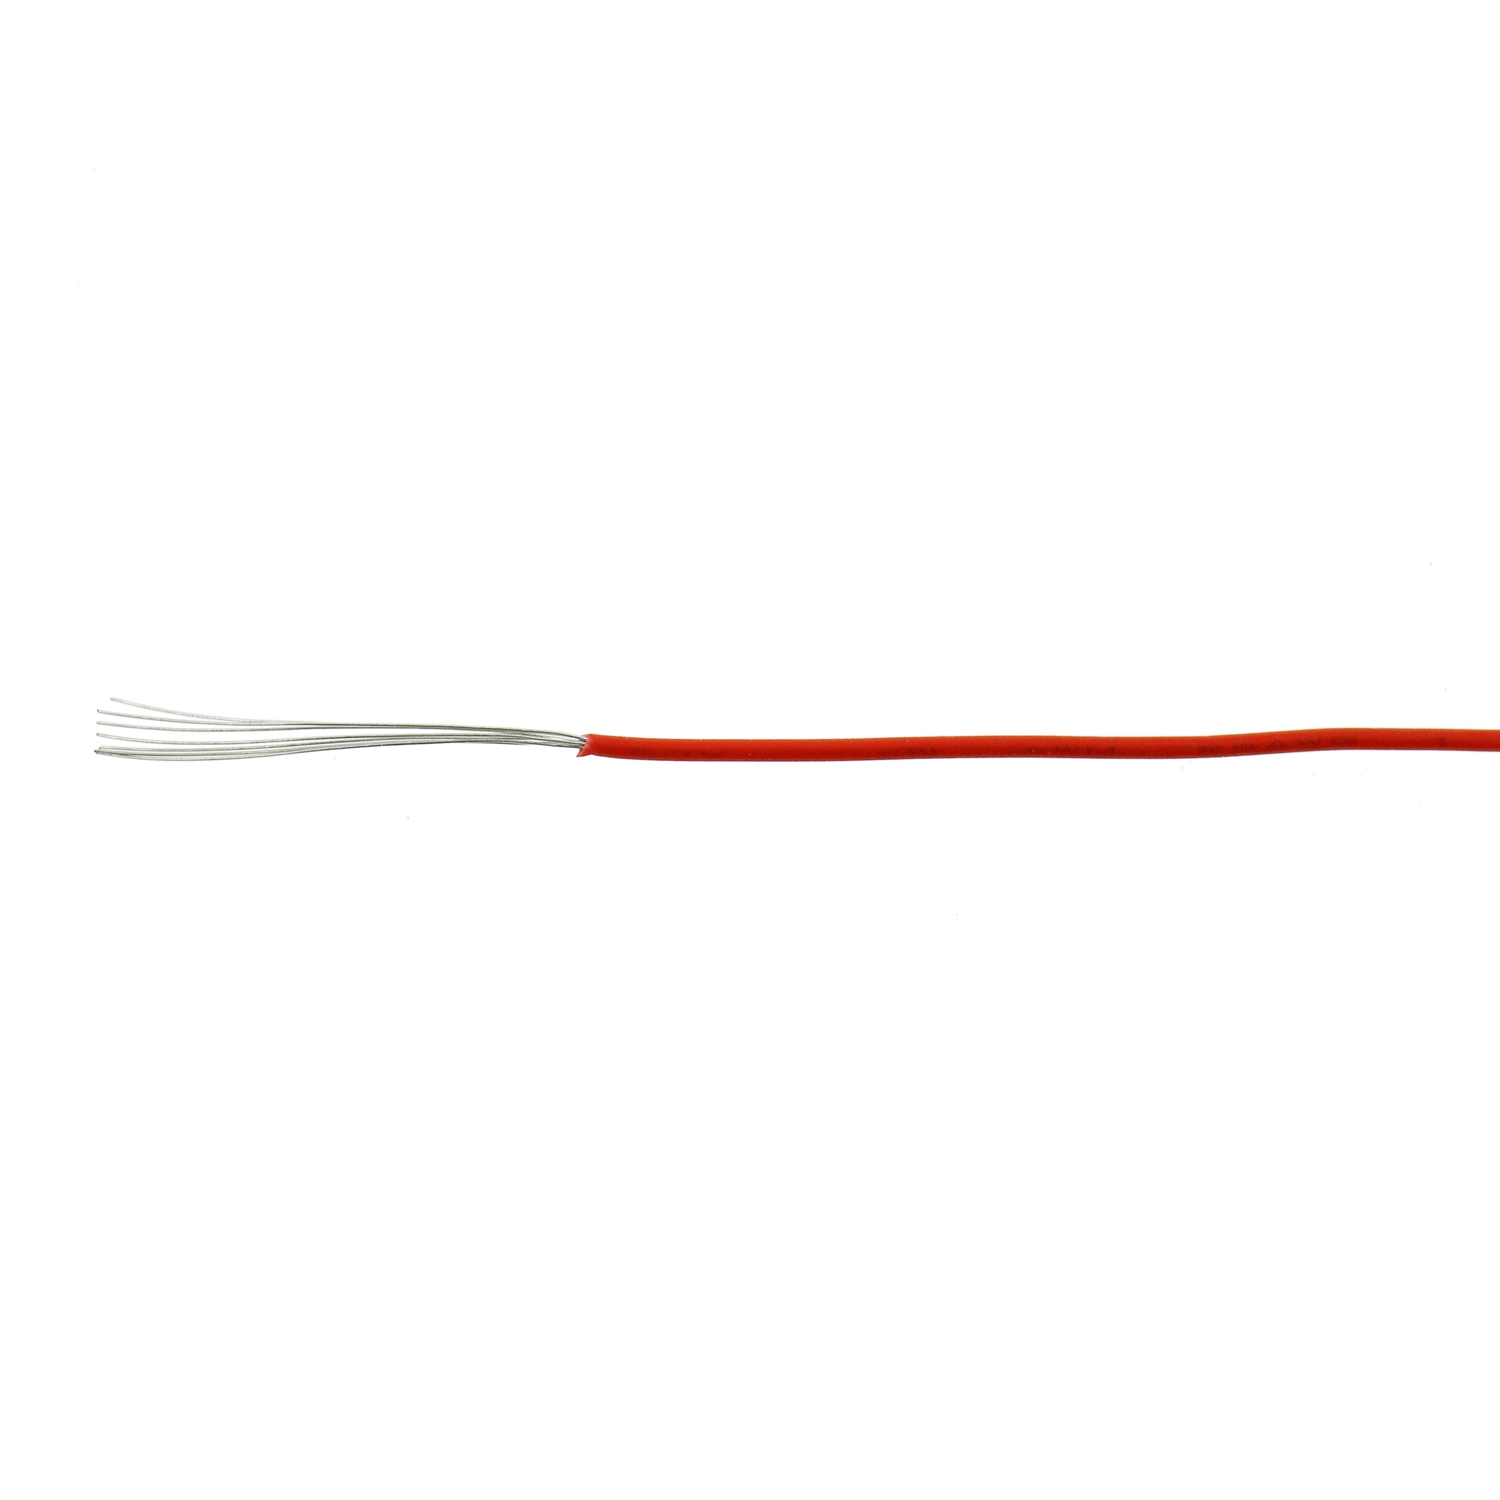 UL3302 Electrical Tinned Copper AWM Wire